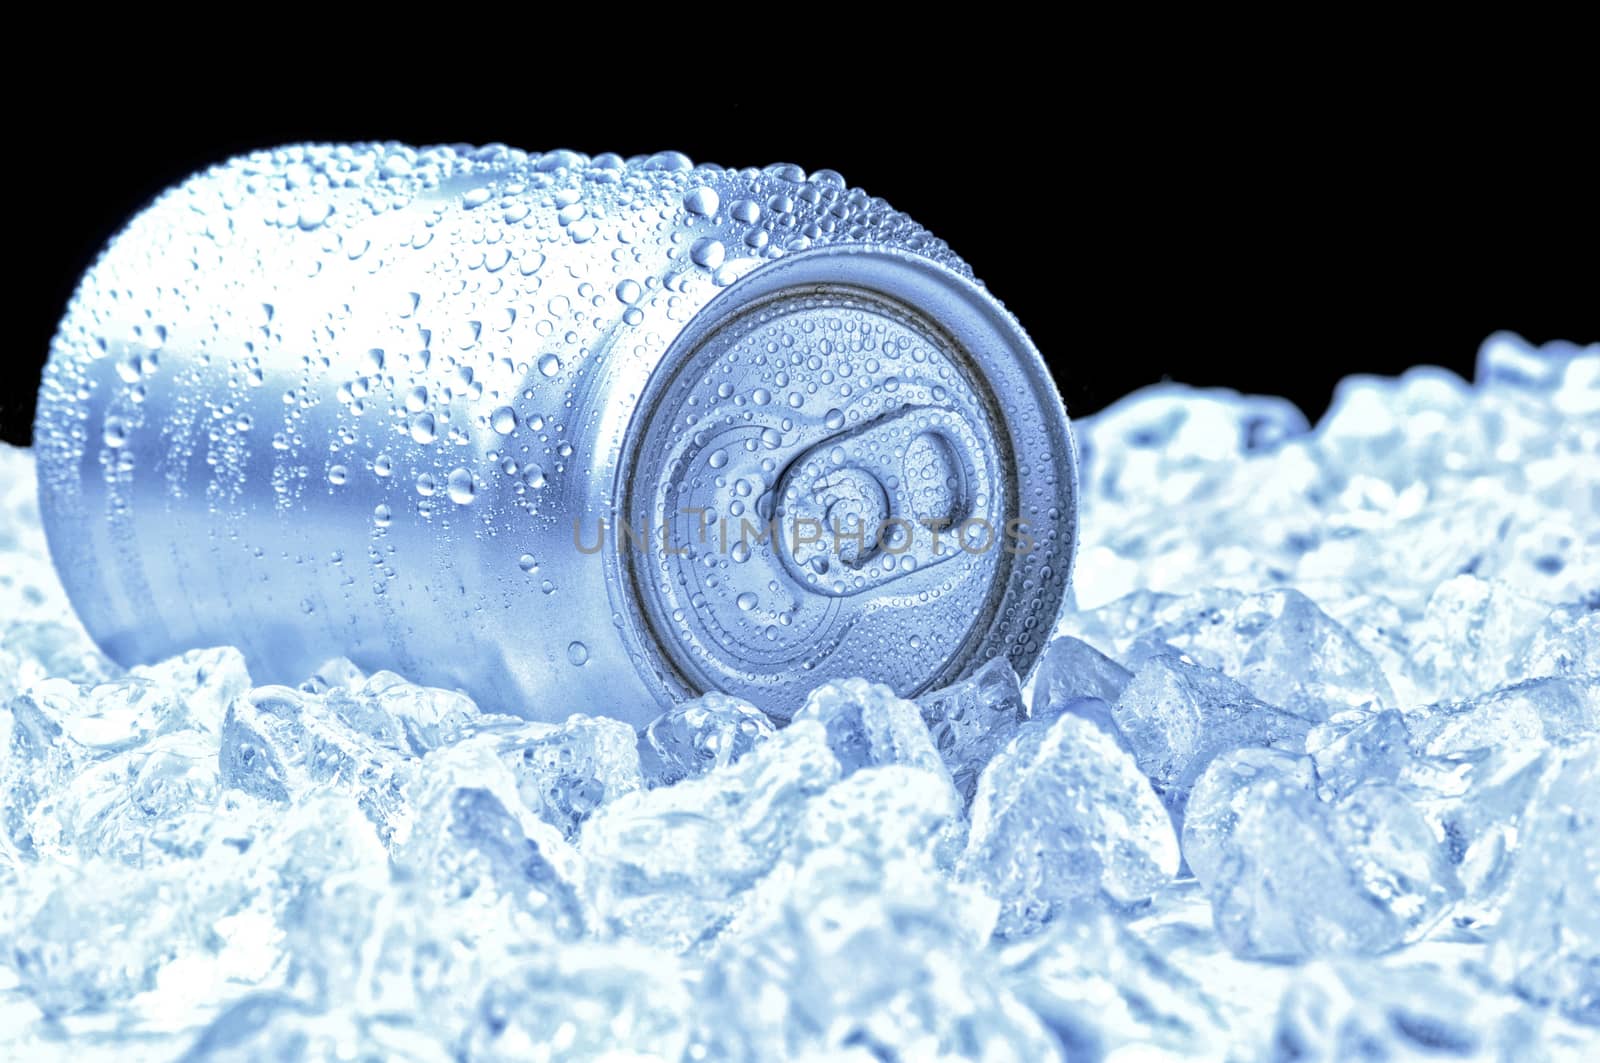 Aluminum Can in Ice with cool tones by sCukrov